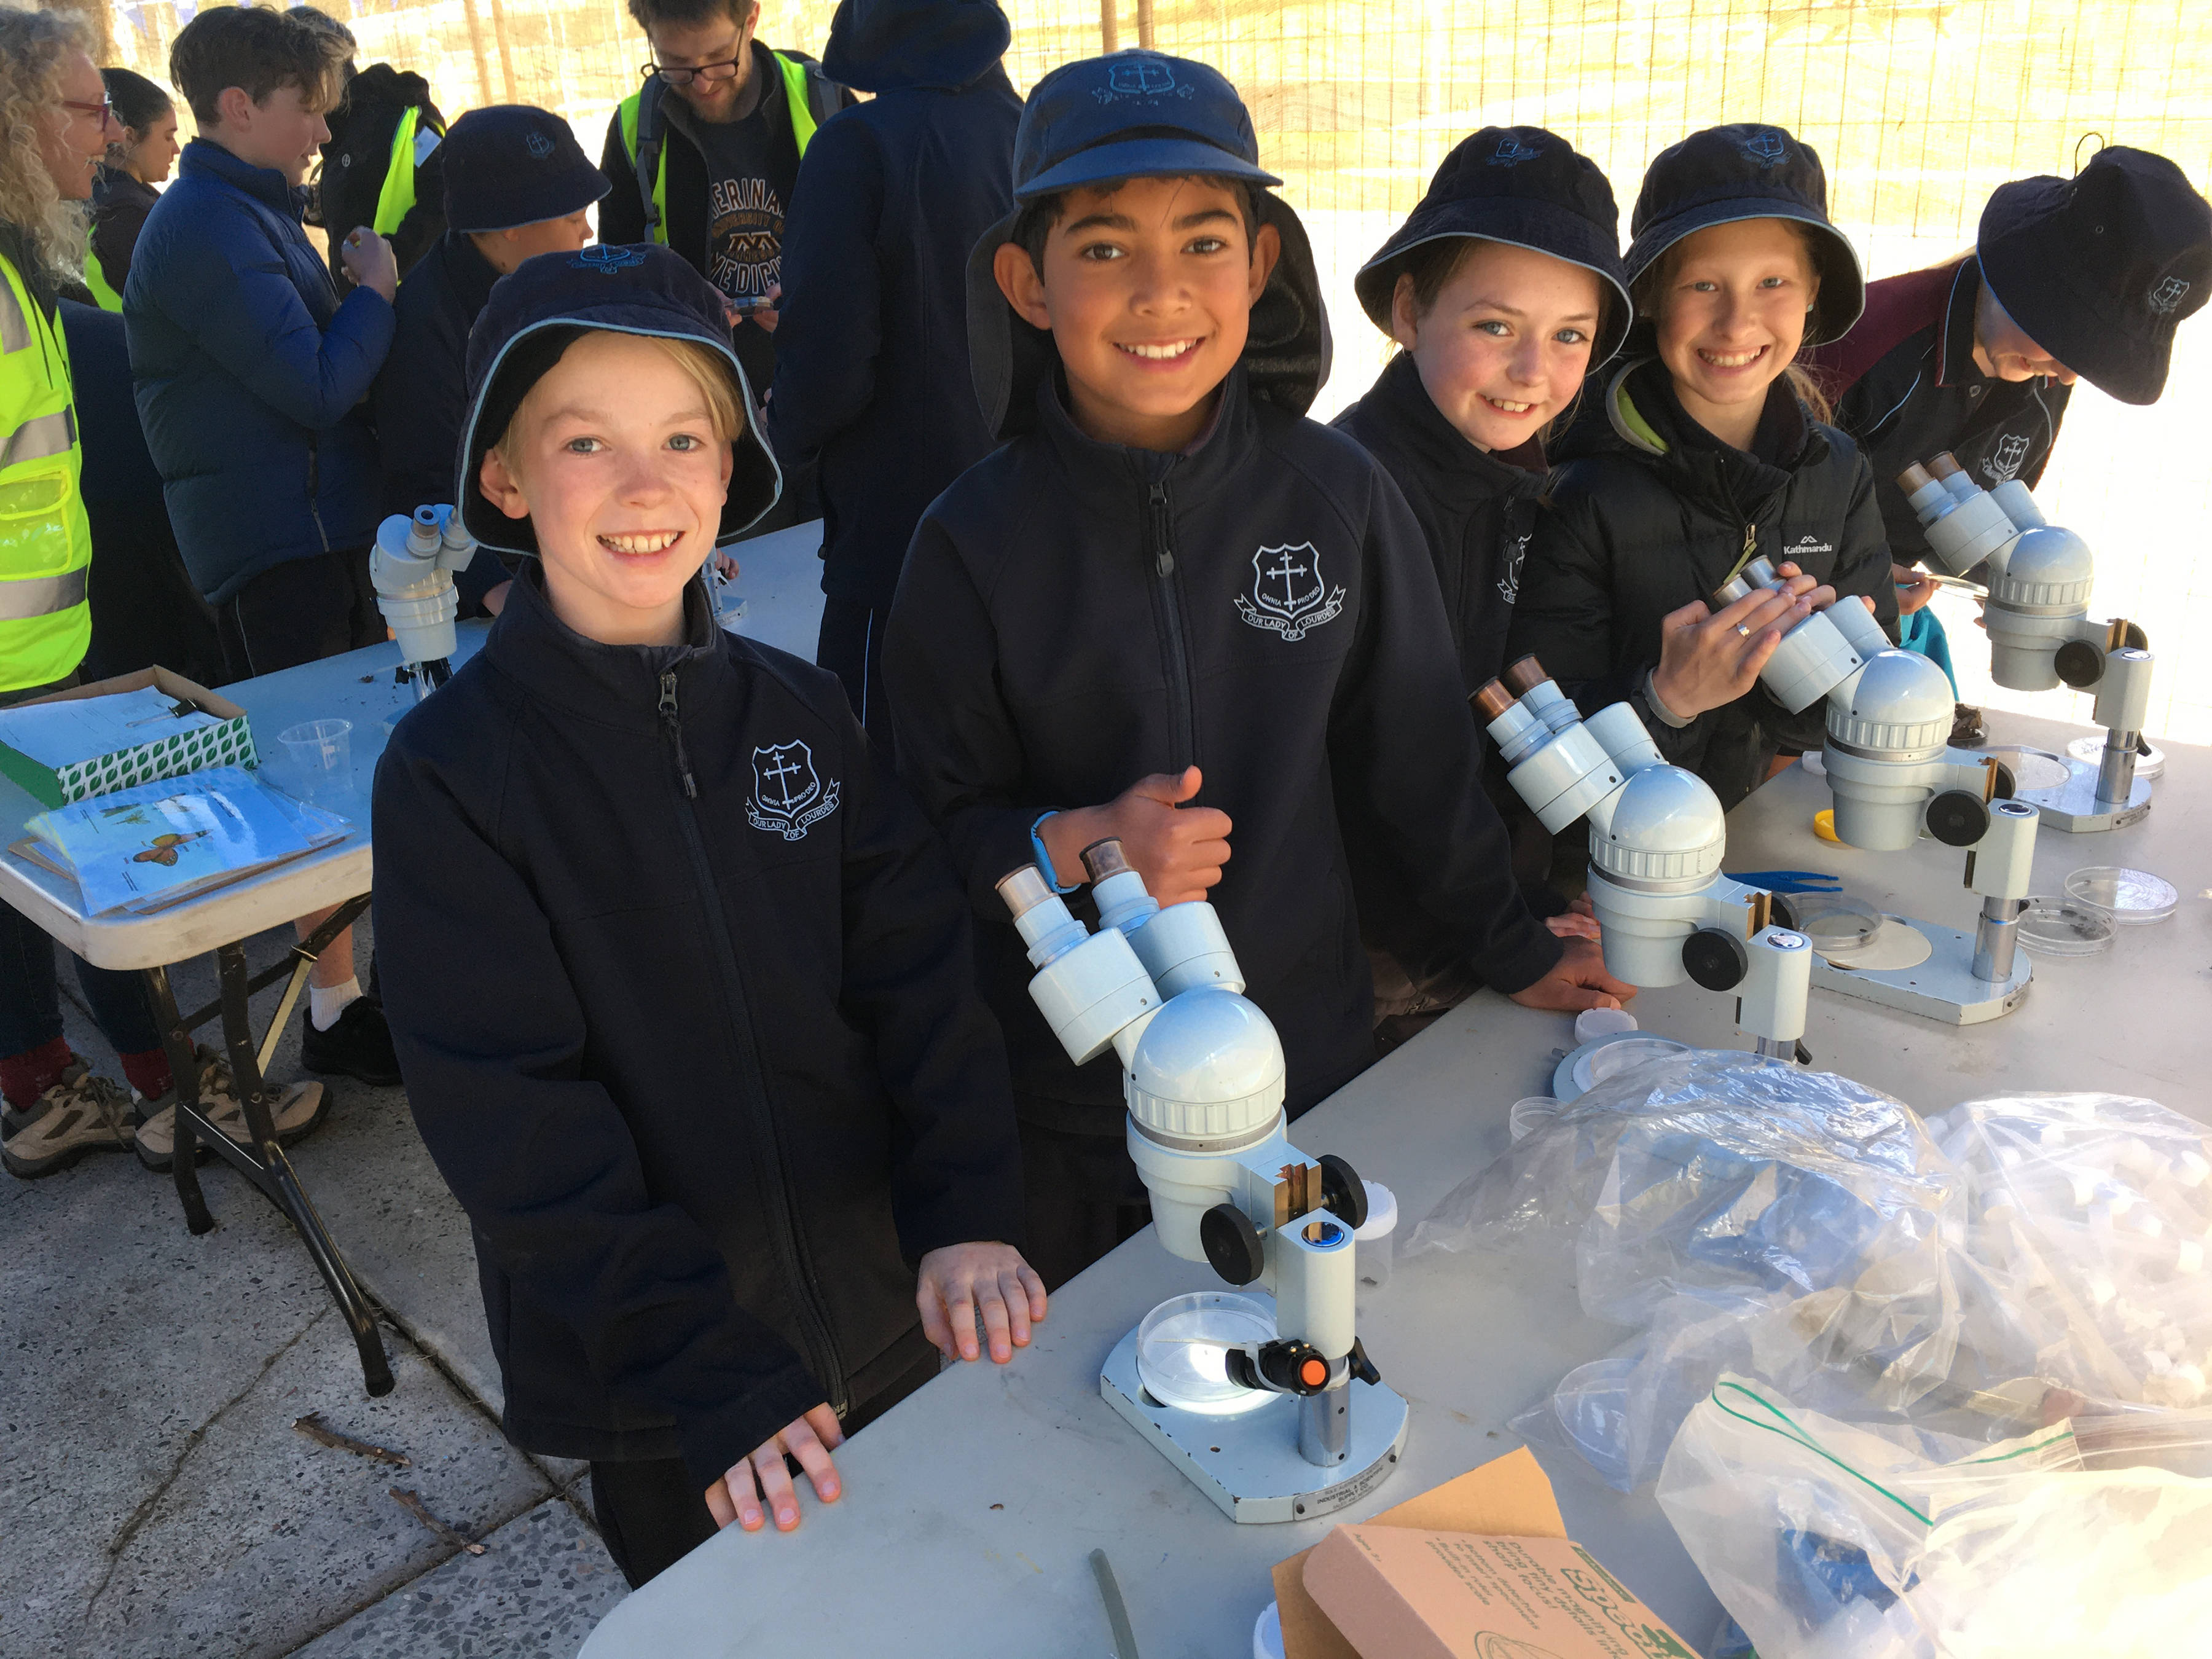 Five primary school students, in navy blue, long sleeved uniforms and hats. Four of the students are looking directly at the camera and smiling, one is busy with a microscope. They are undercover but outside and standing behind a table that has four microscopes on it. There are more students in the background, engaged in other activities.